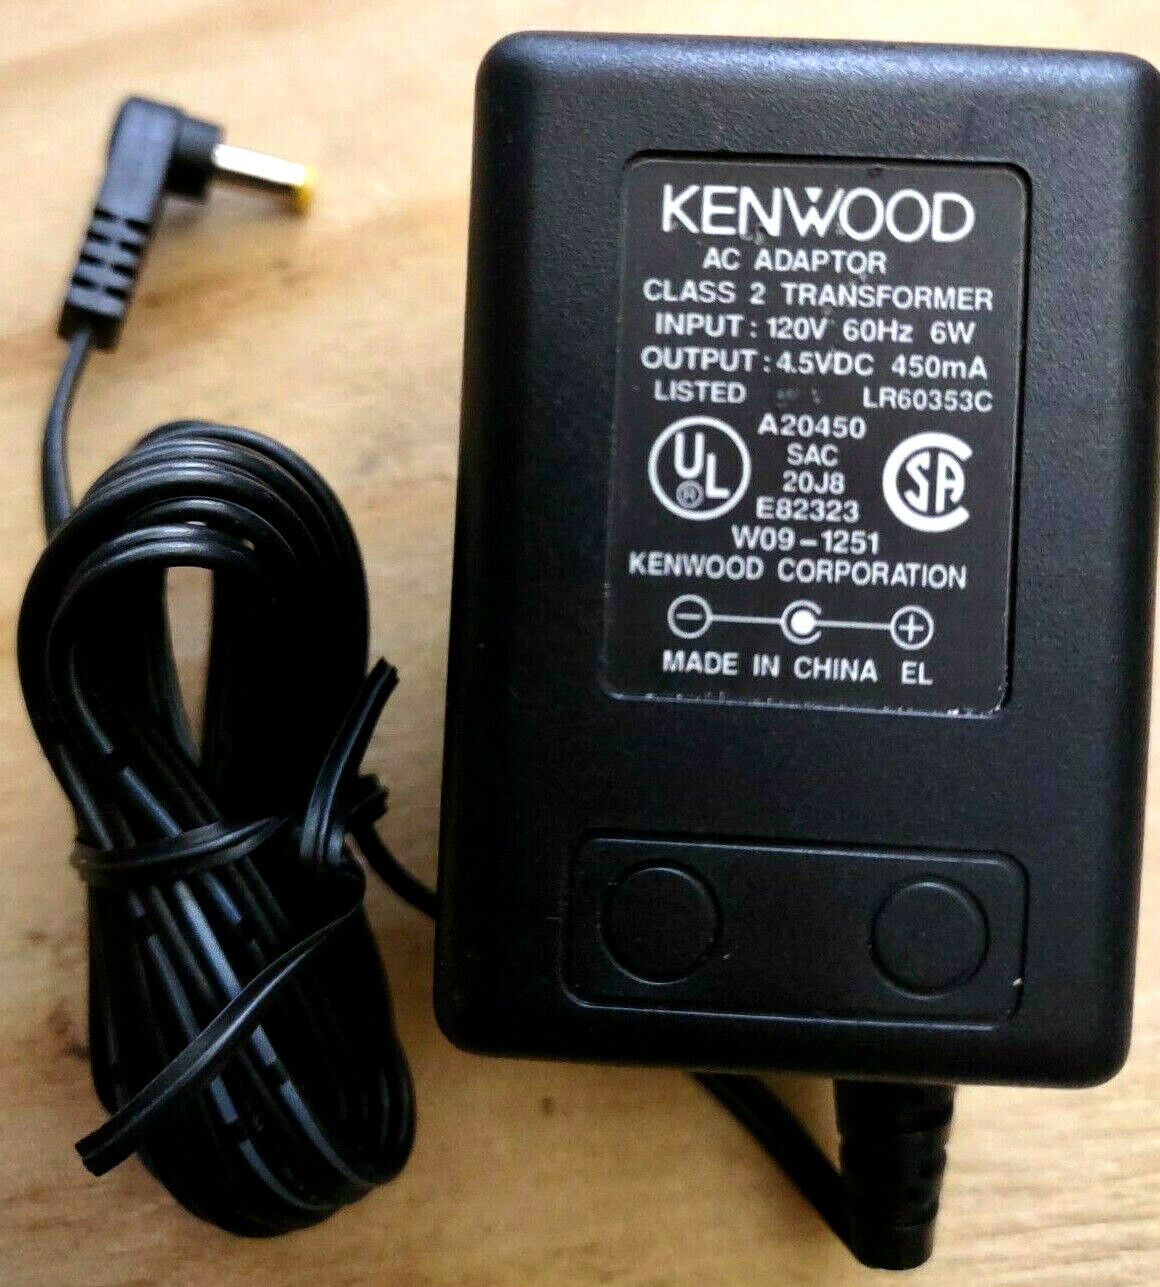 *Brand NEW*for Kenwood A20450 E83323 W09-1251 AC Adapter Charger Power Supply Cord